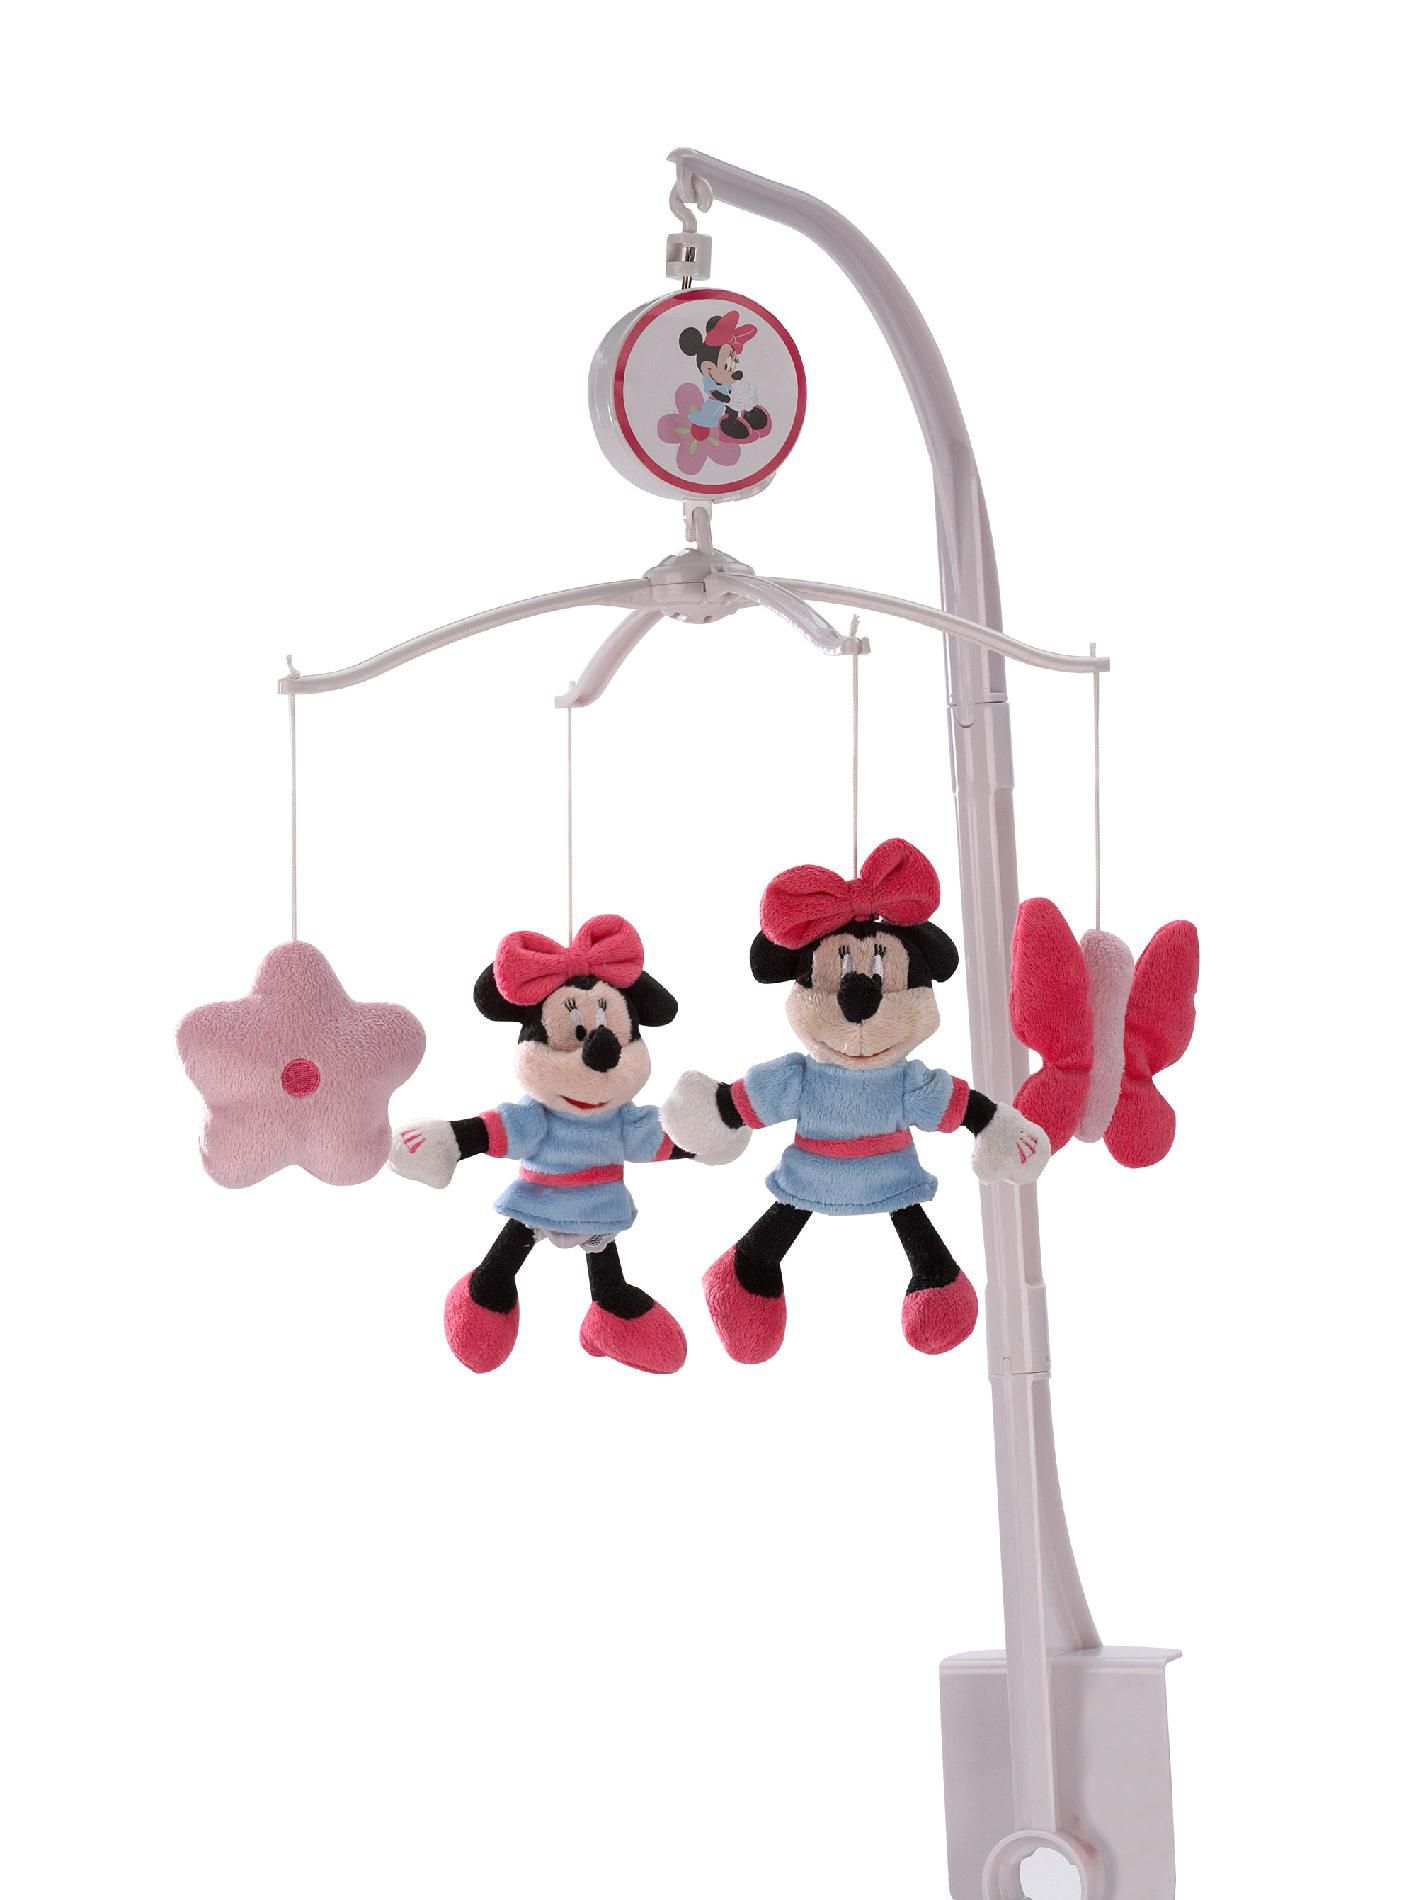 Disney Baby Minnie Mouse Mobile   Baby   Baby Gear   Baby Toys